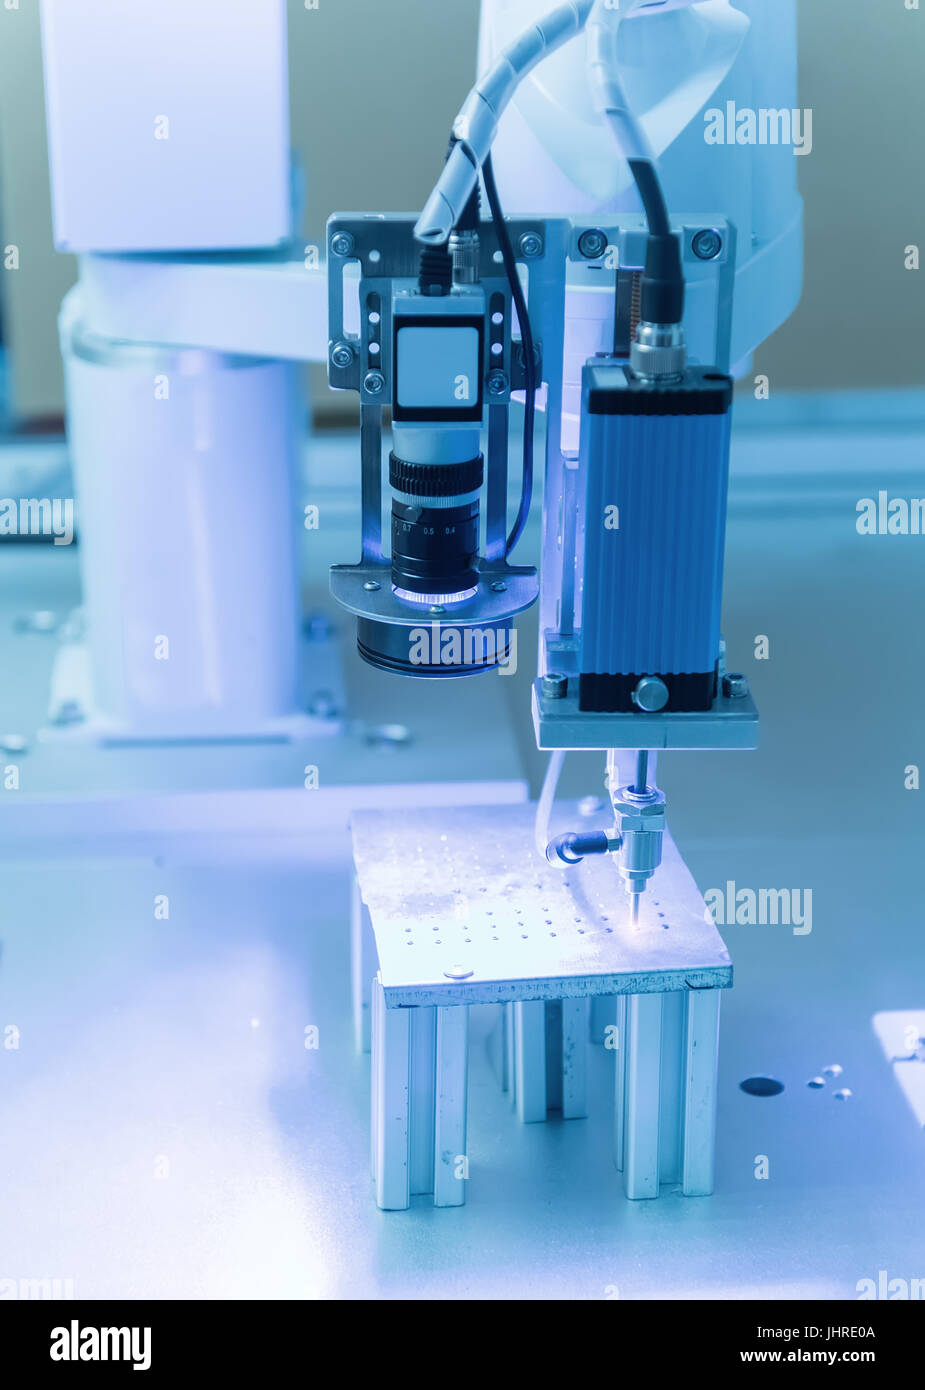 robot drill machine tool at industrial manufacture factory Stock Photo